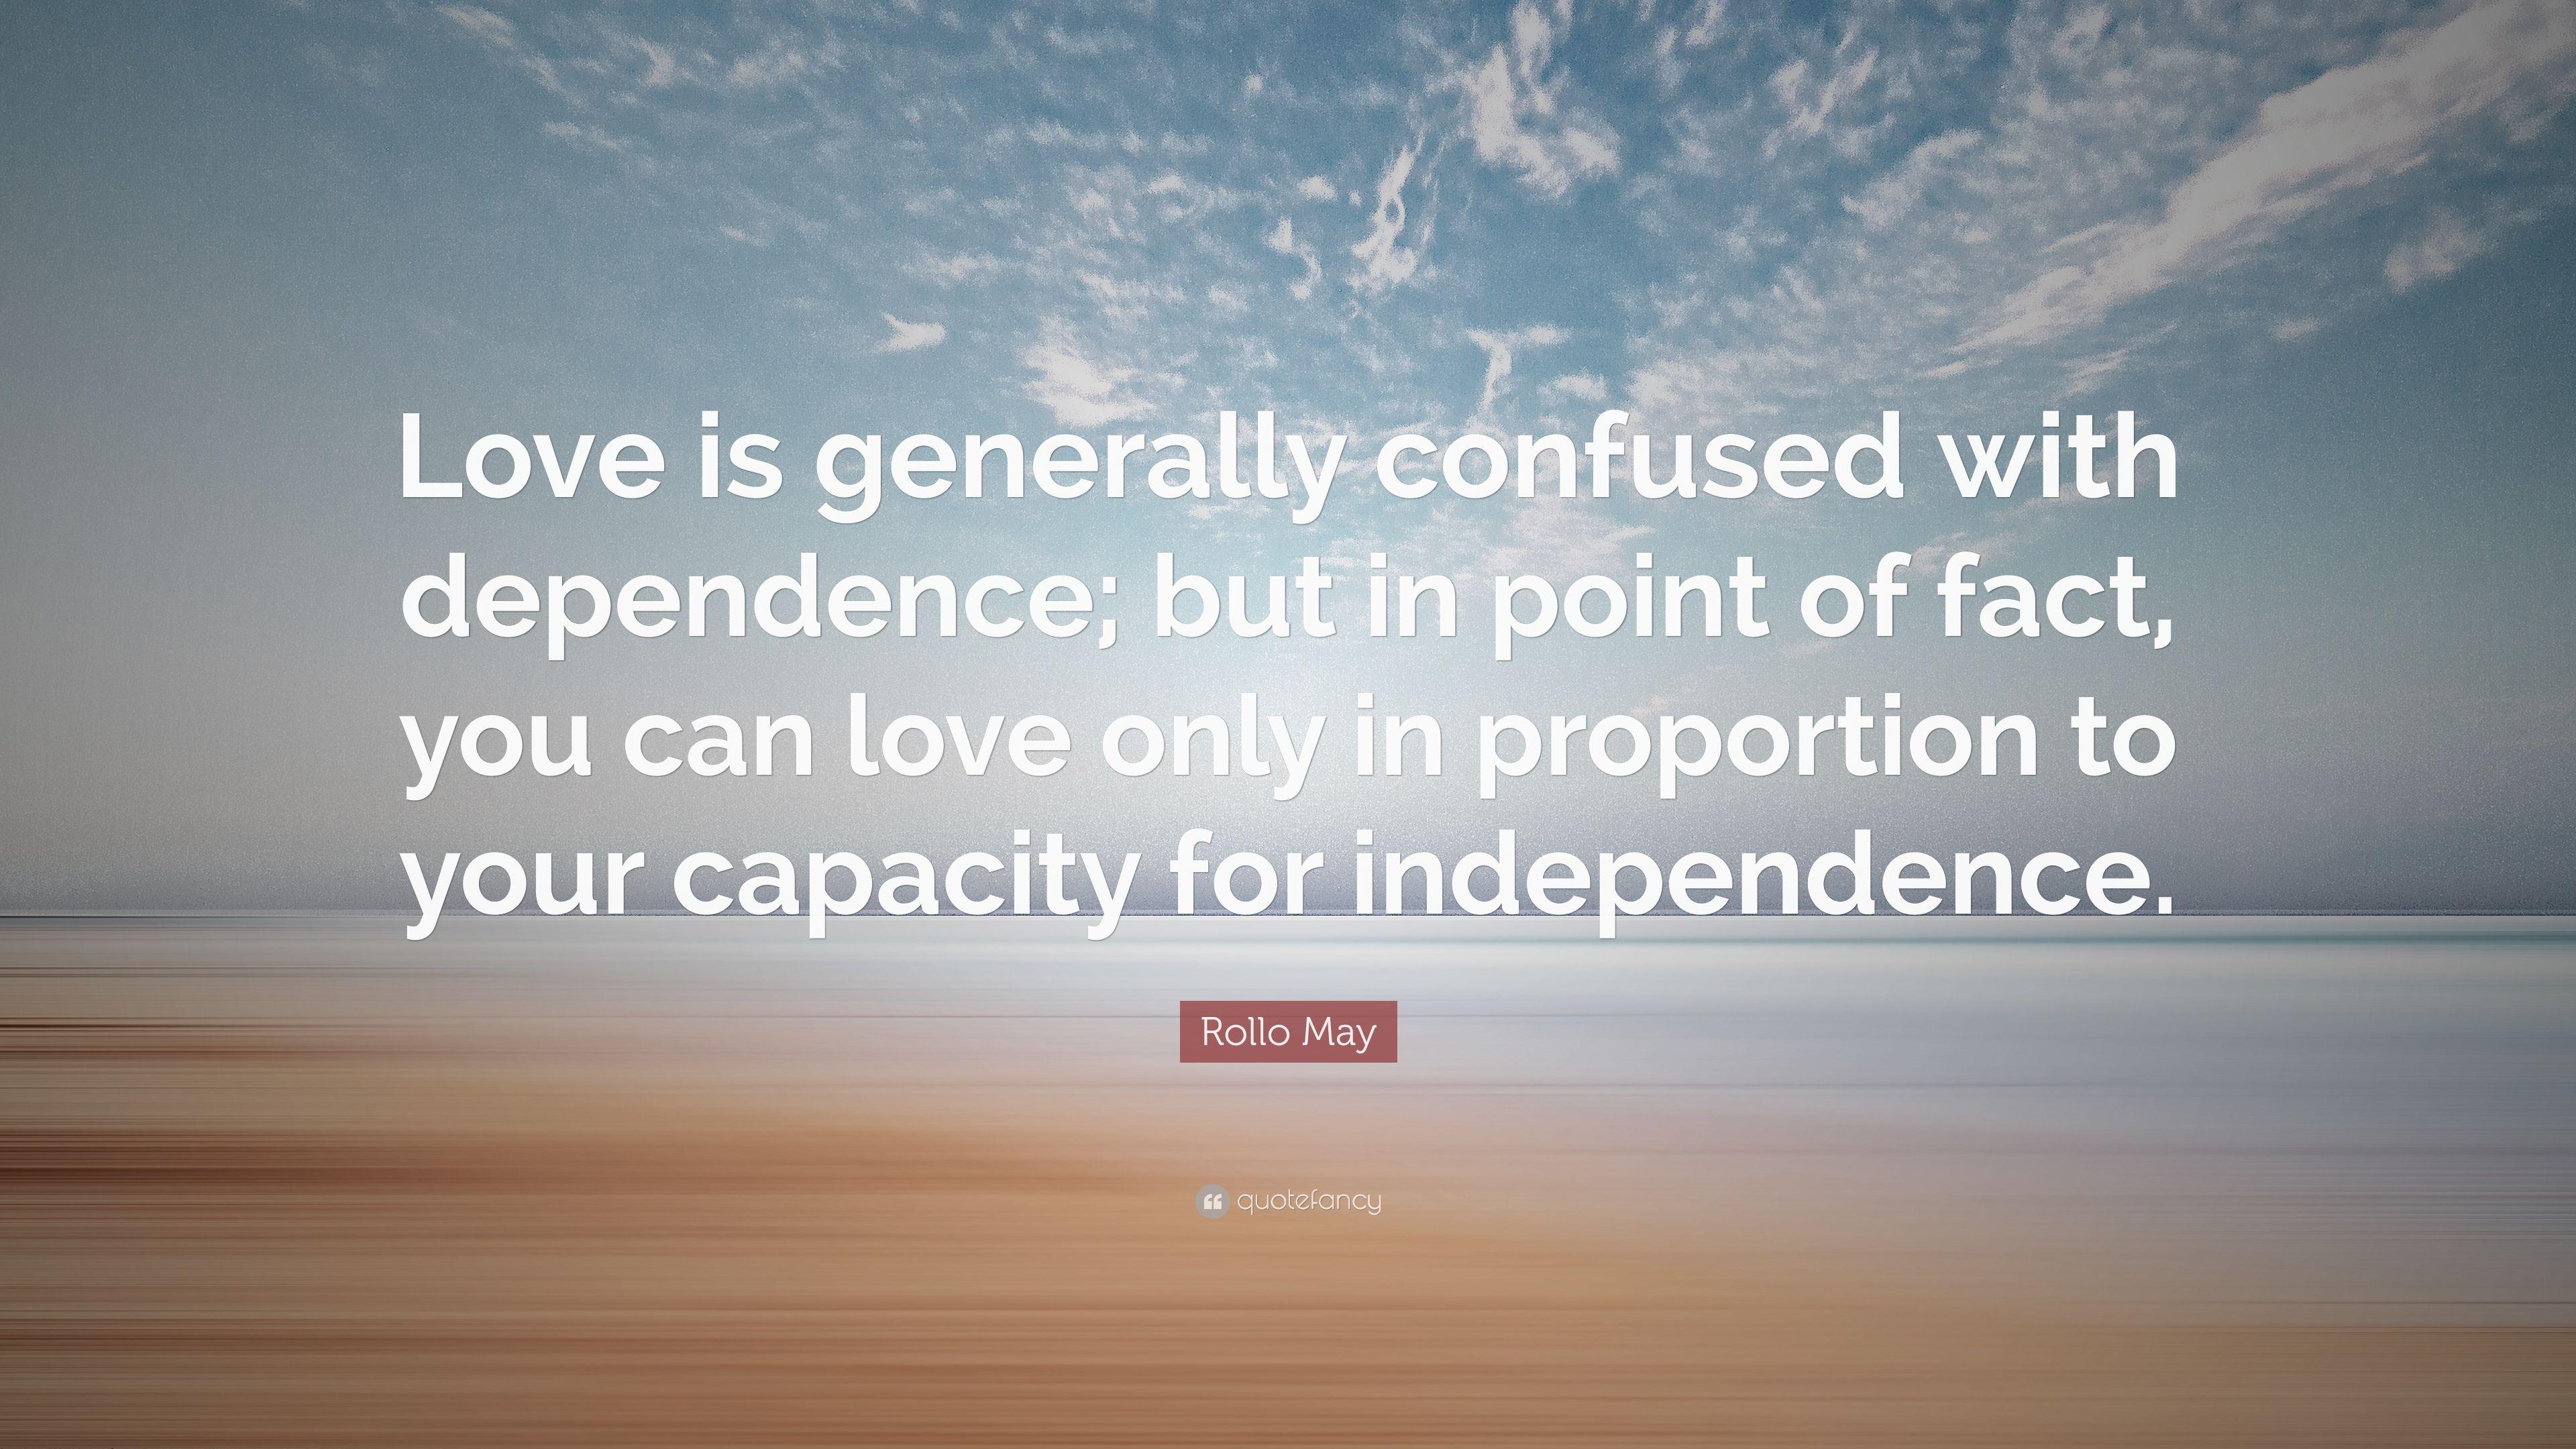 Rollo May Quote: “Love is generally confused with dependence; but